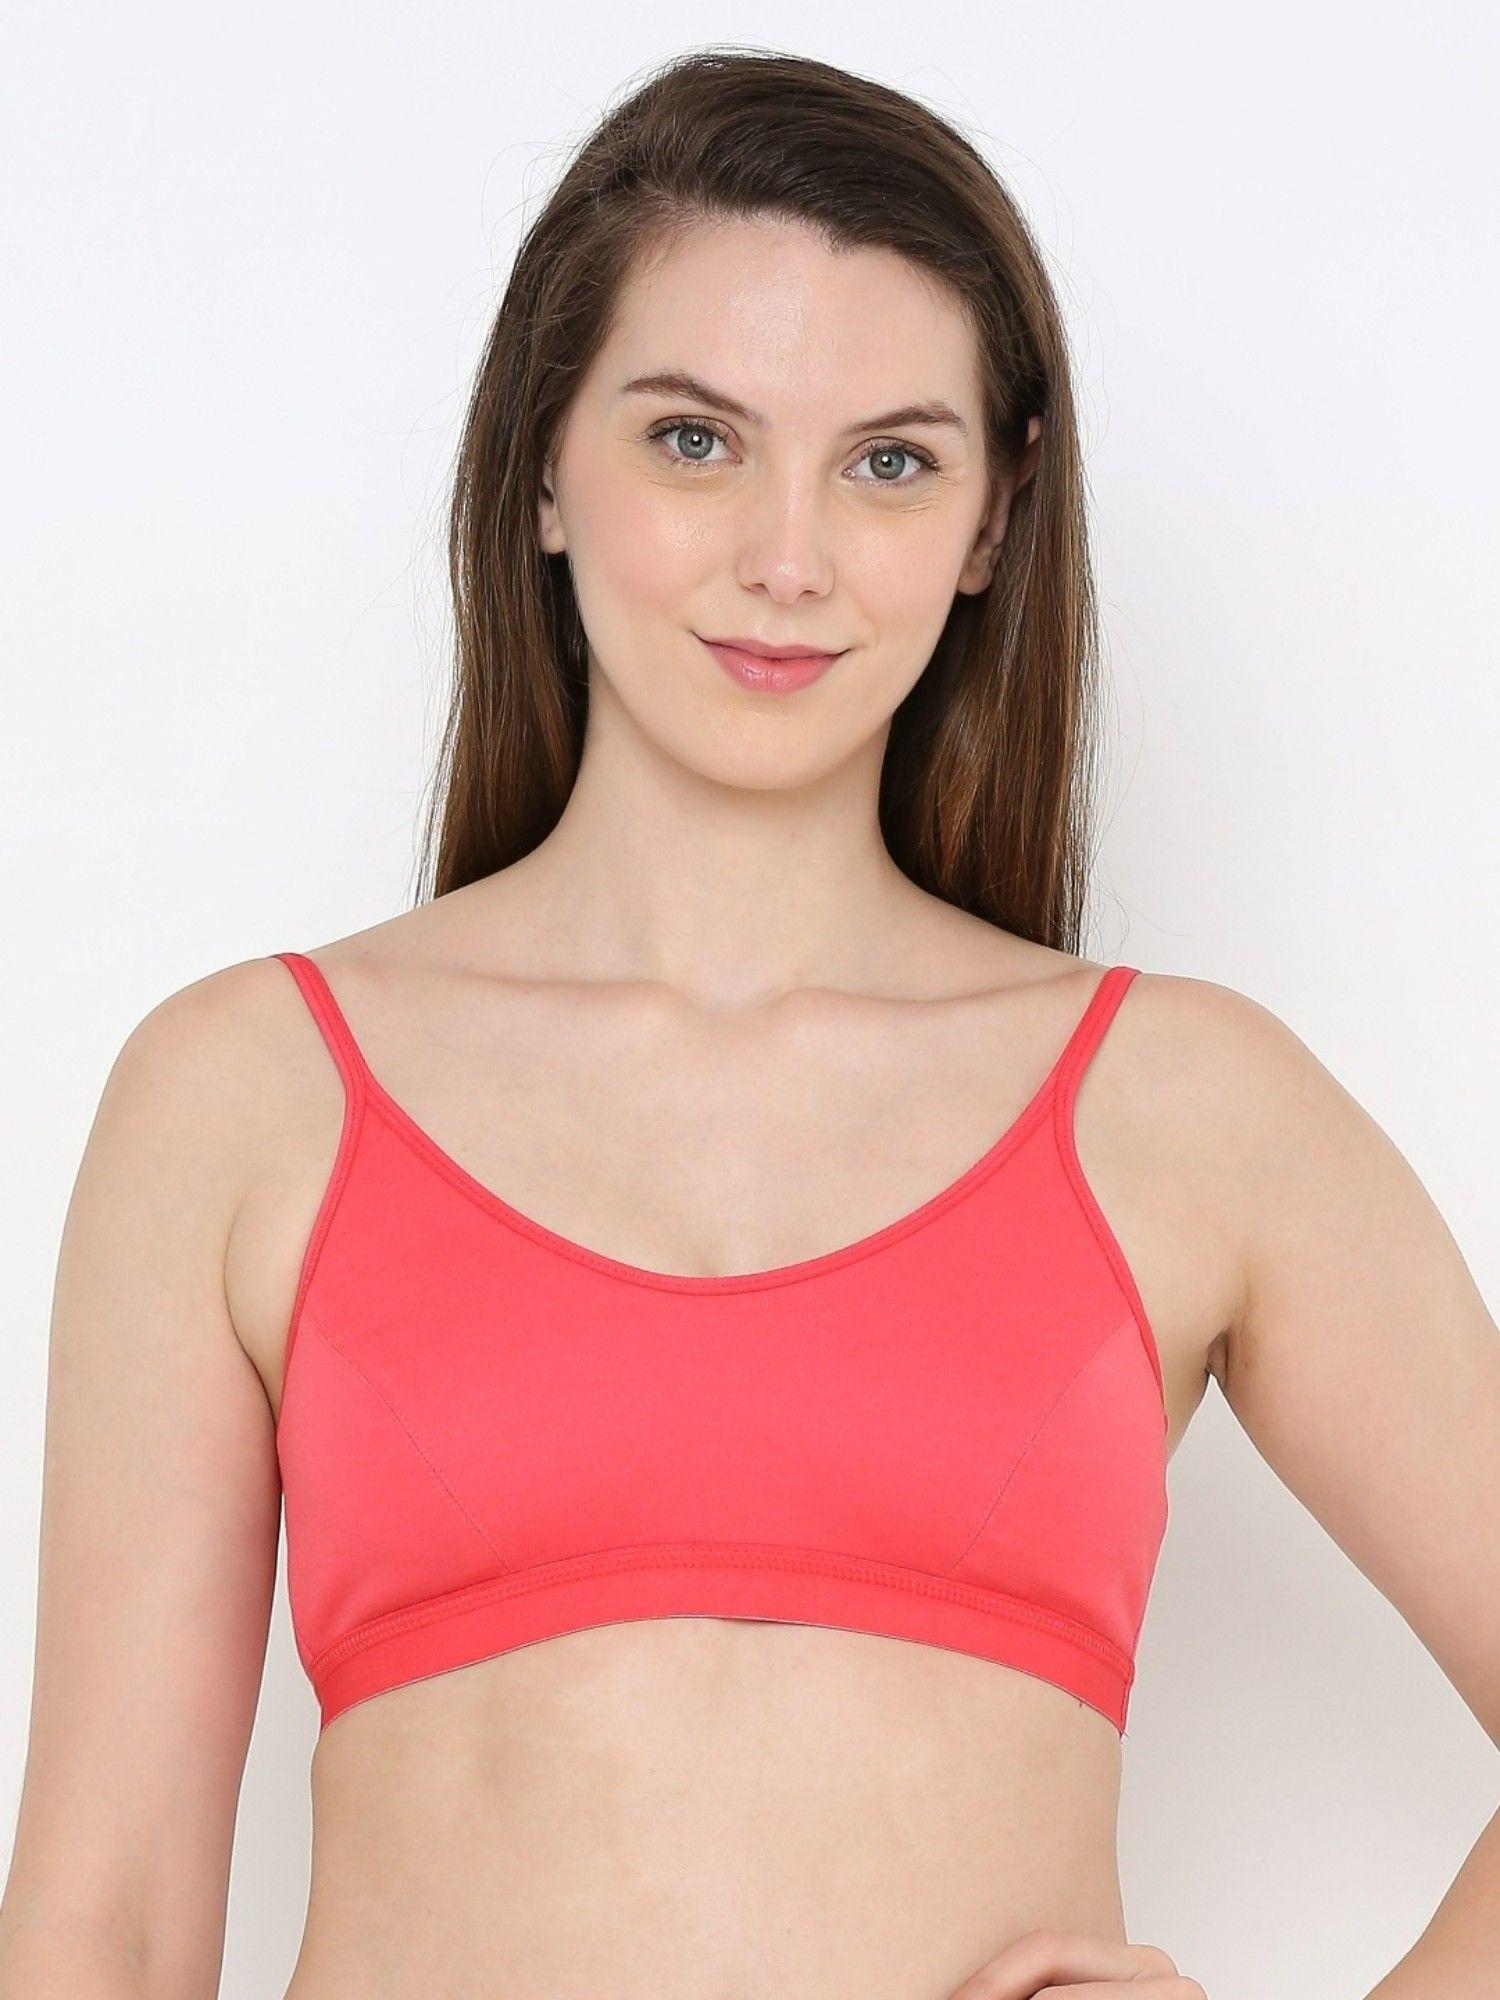 Tomato Red Color Non-Wired & Non Padded with Medium Coverage Bra